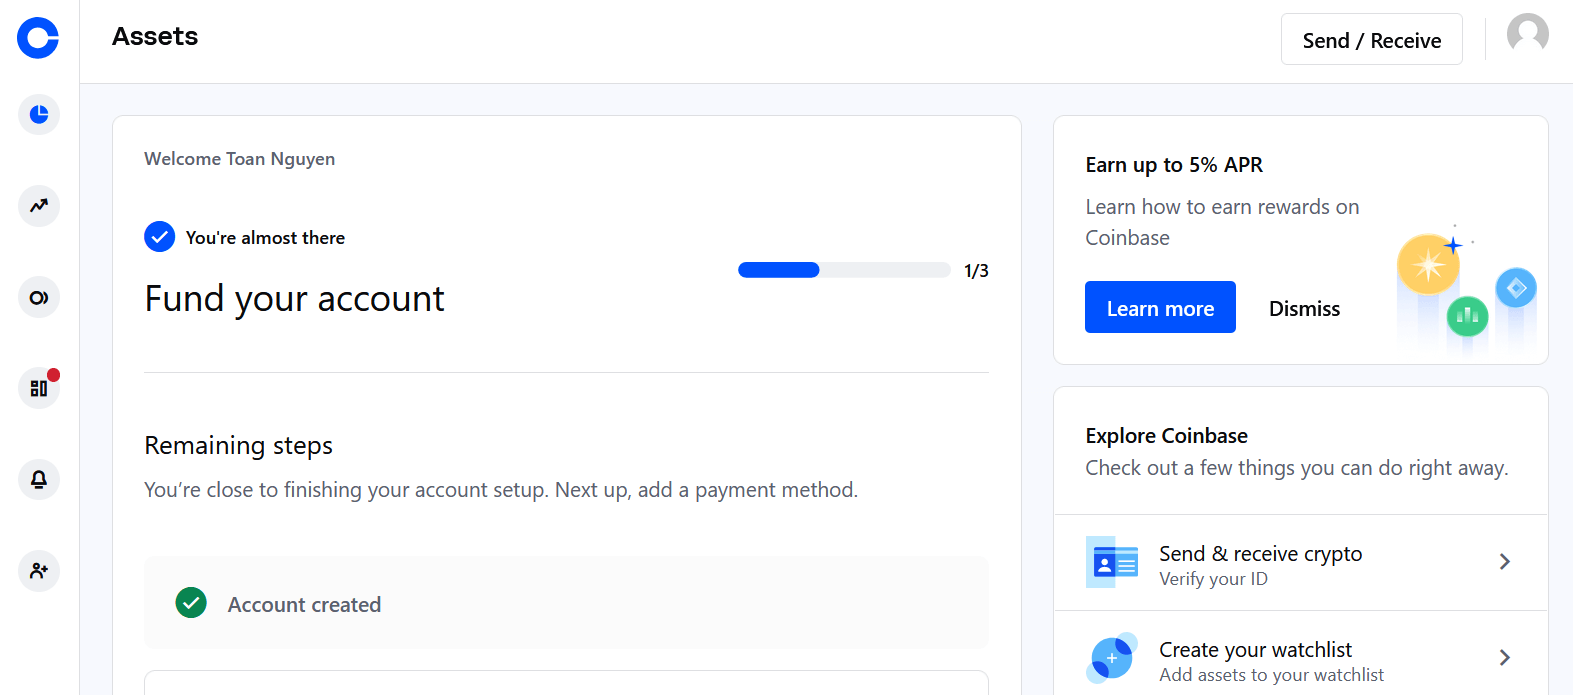 How to Open Account and Sign in to Coinbase